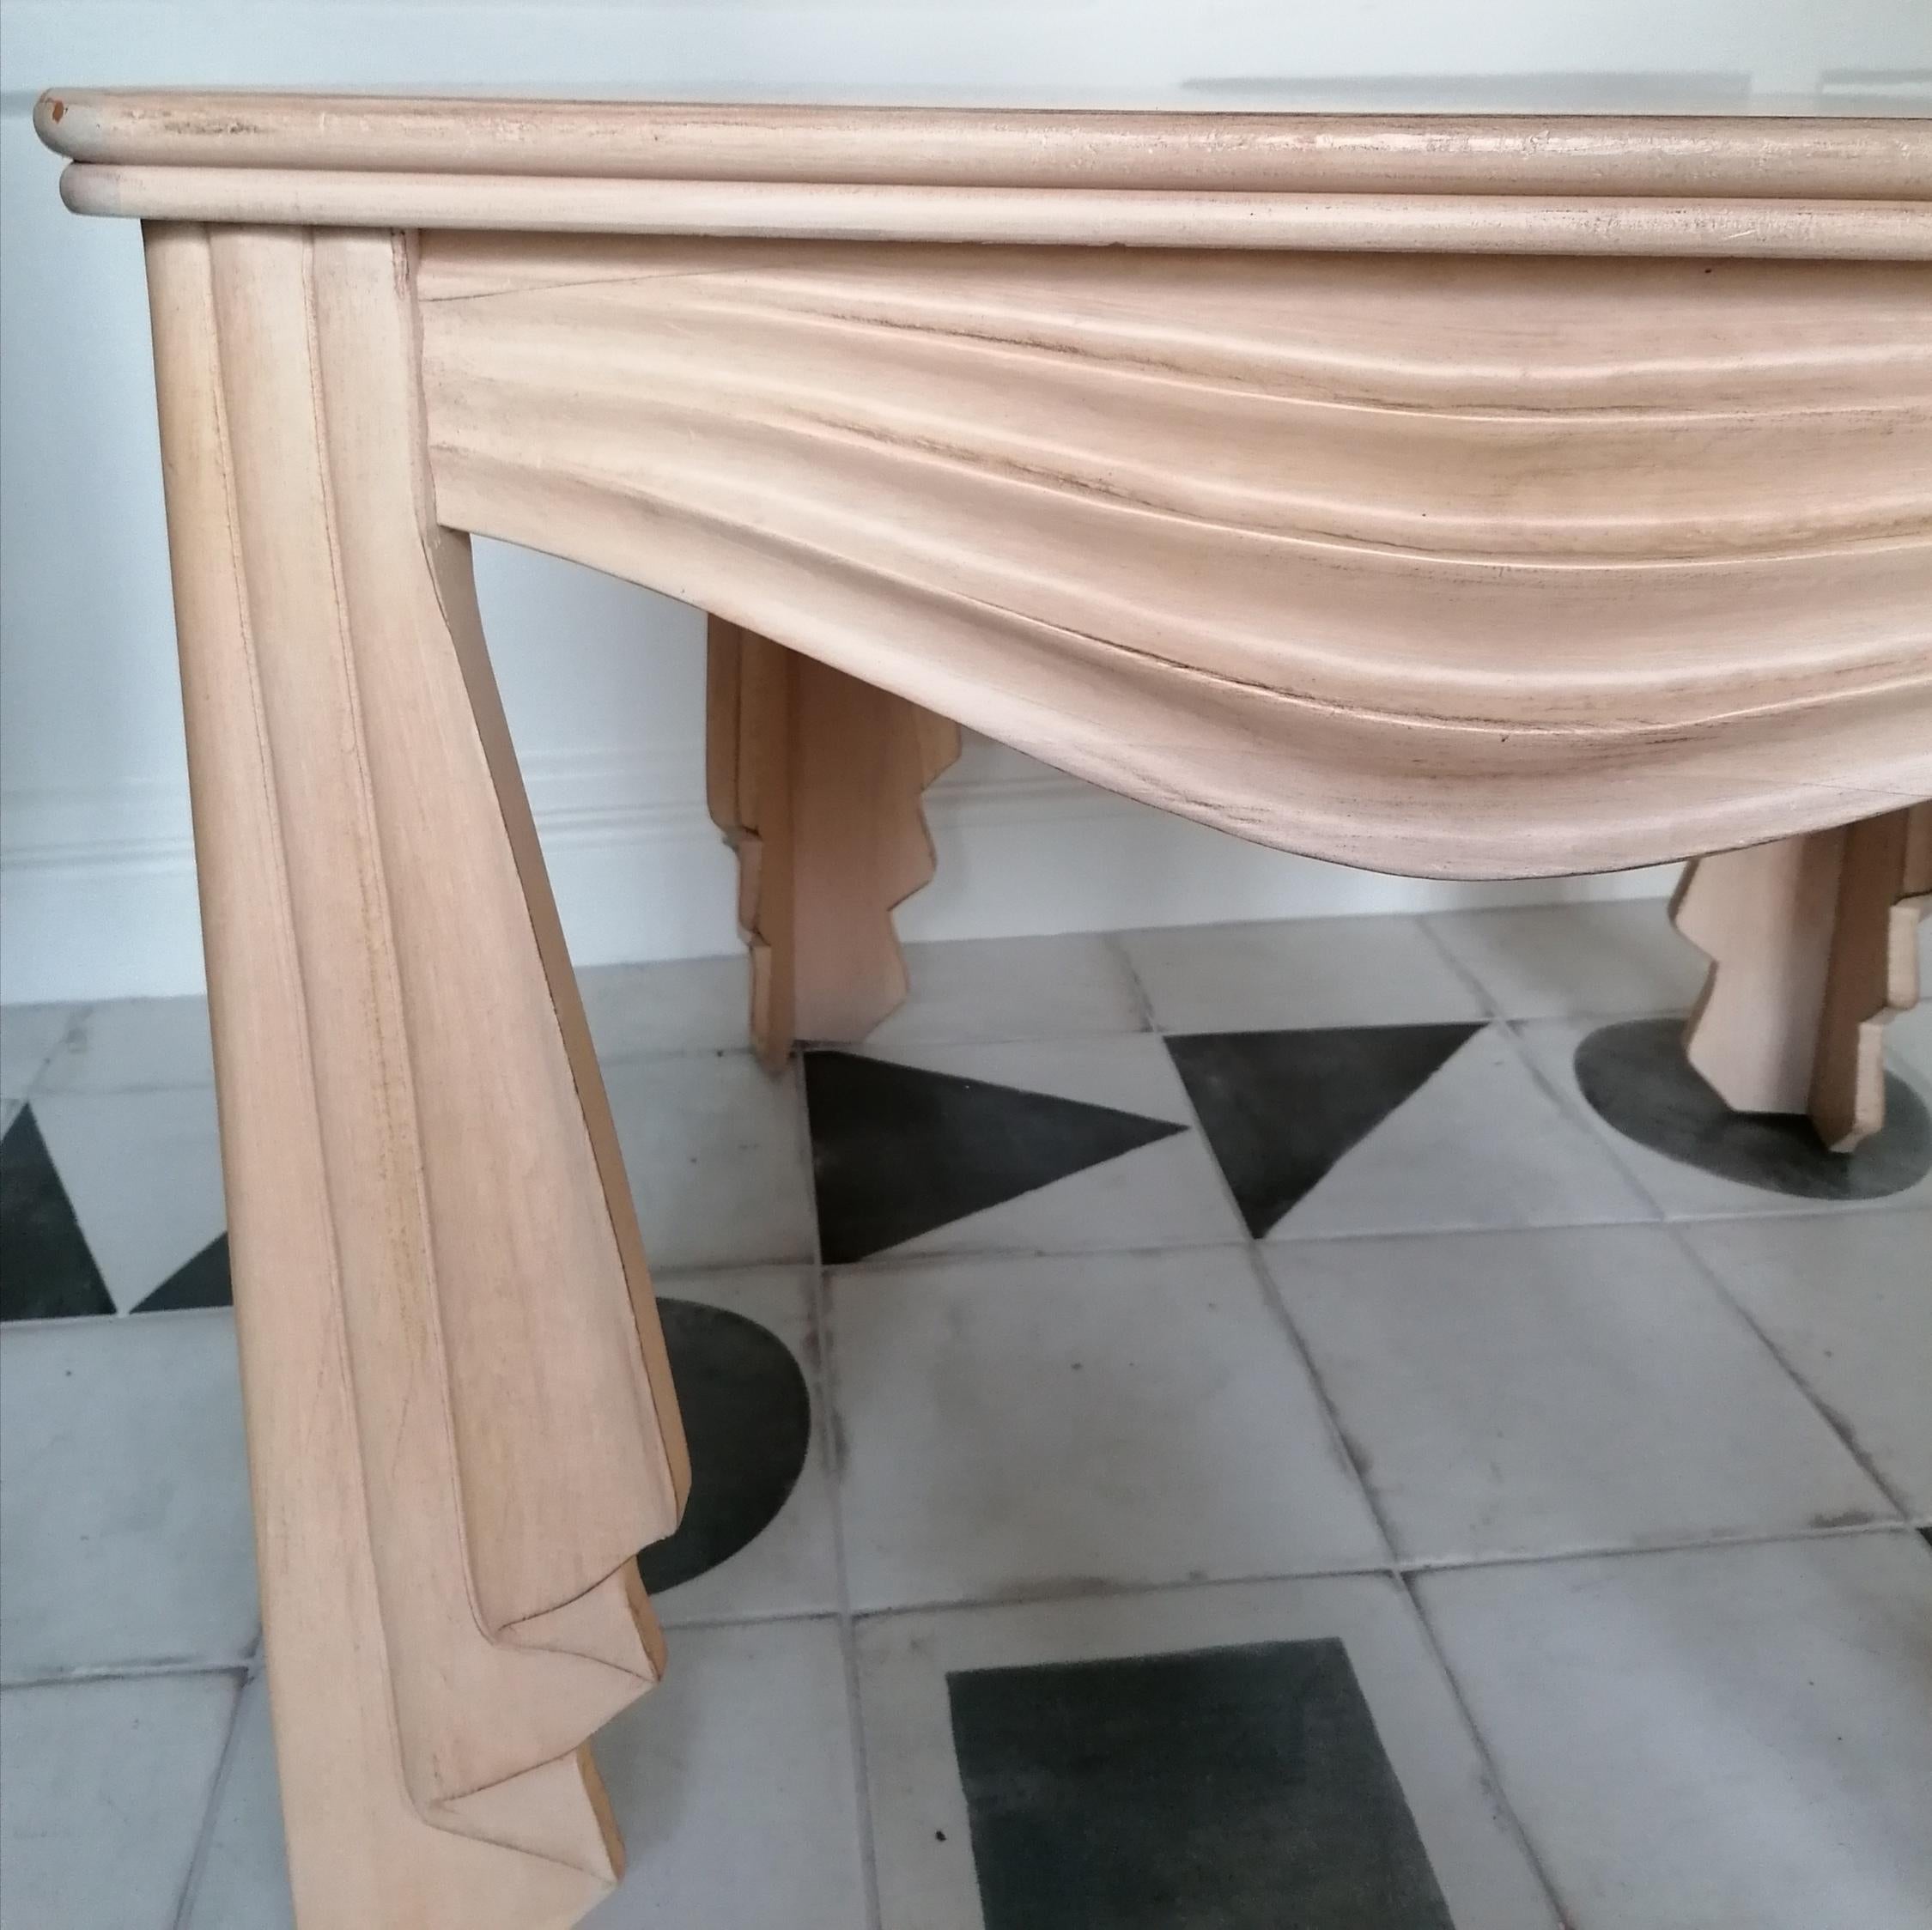 Varnished Rare Vintage Carved Wood Trompe L'oeil Draped Swags Side/End Table, USA, C1980s